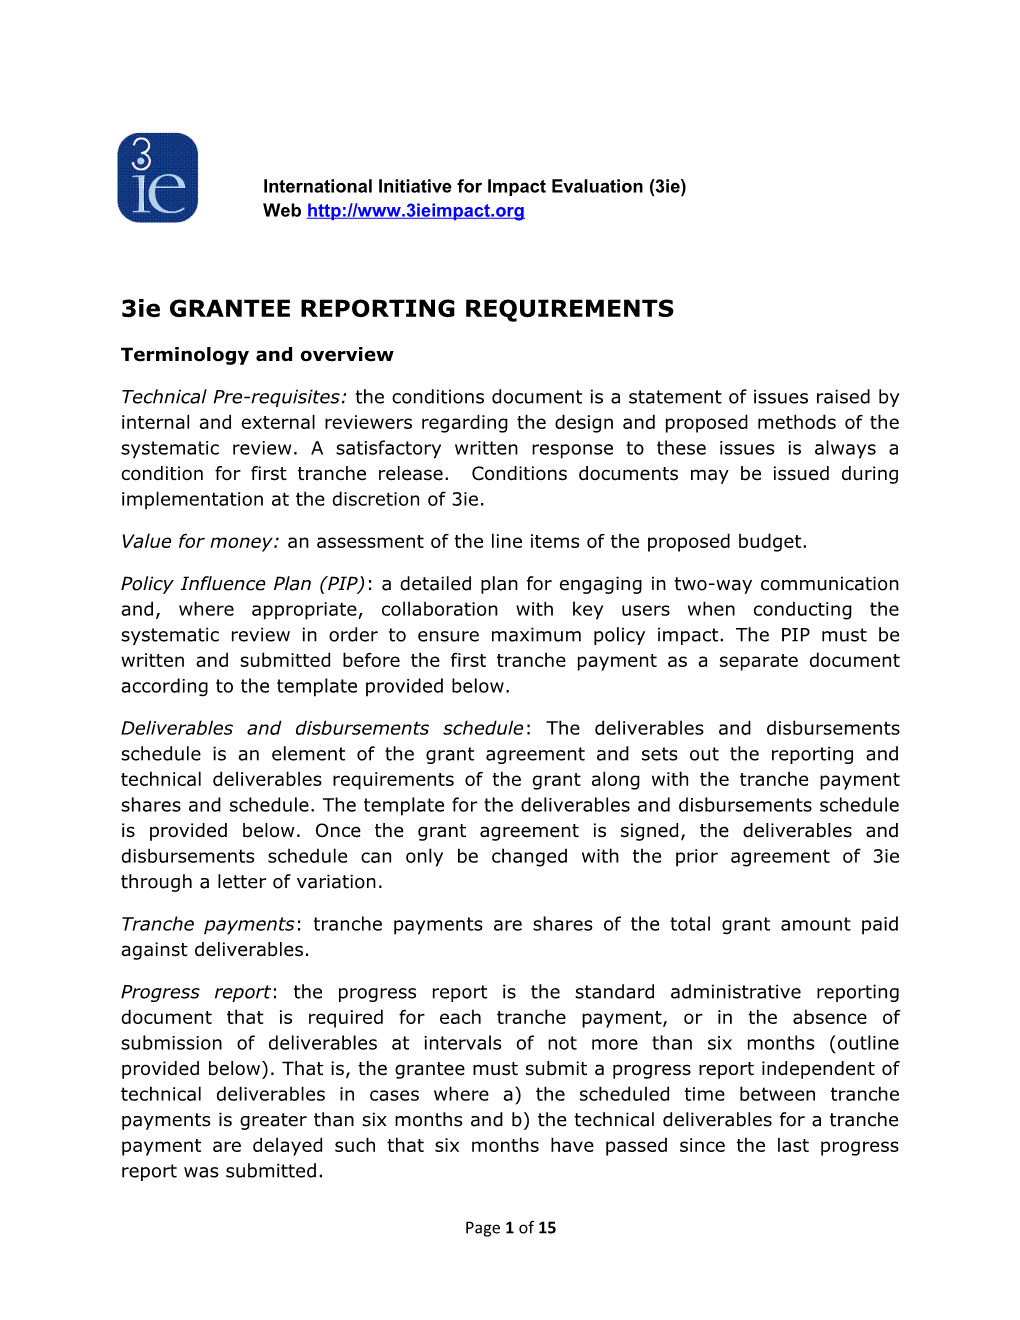 3Ie GRANTEE REPORTING REQUIREMENTS